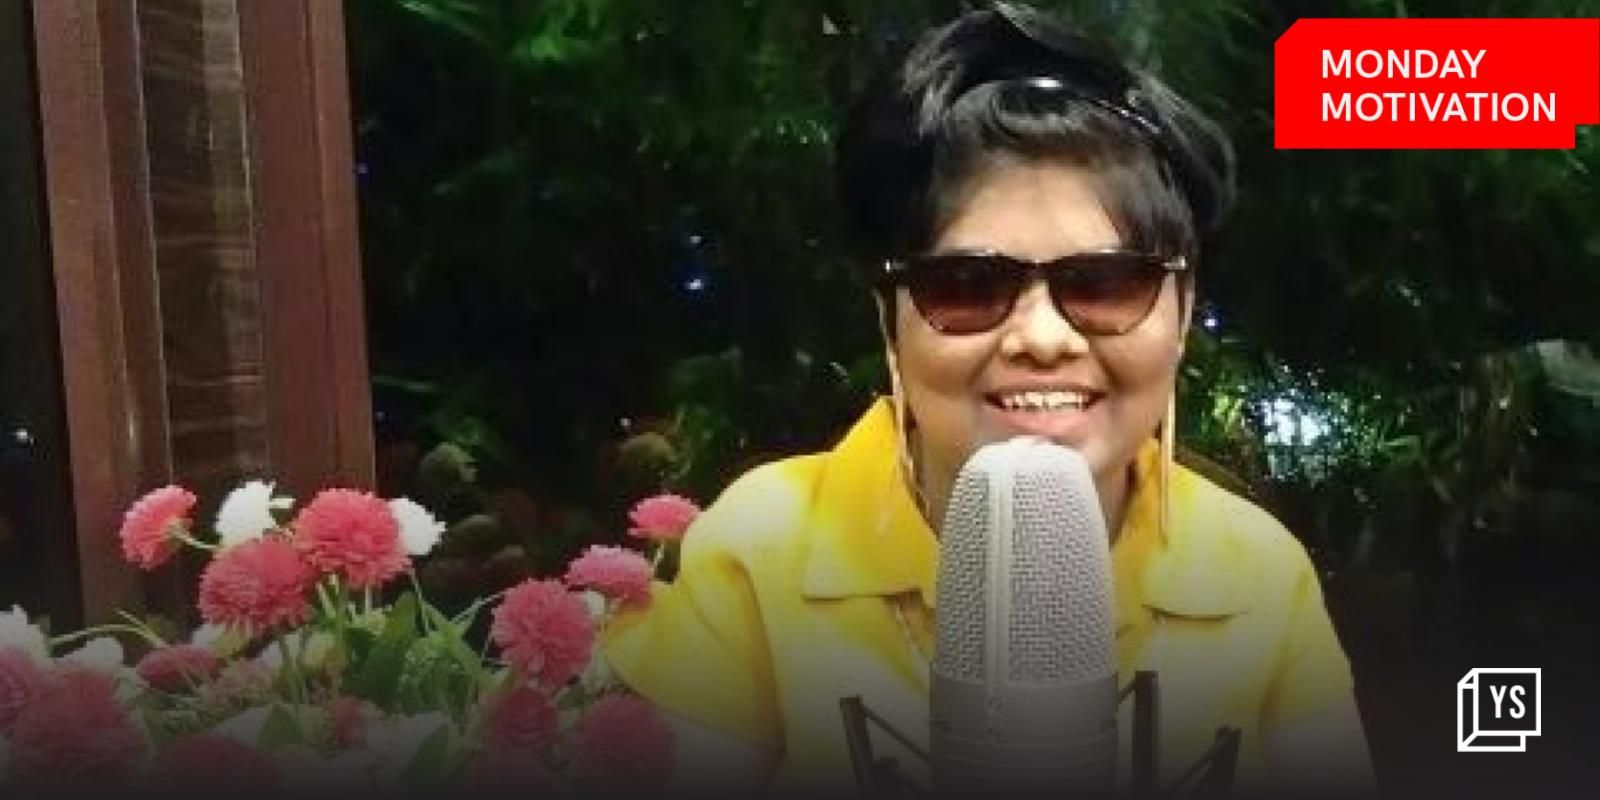 Beyond disability: How this autistic, visually-impaired singer battled all odds with music